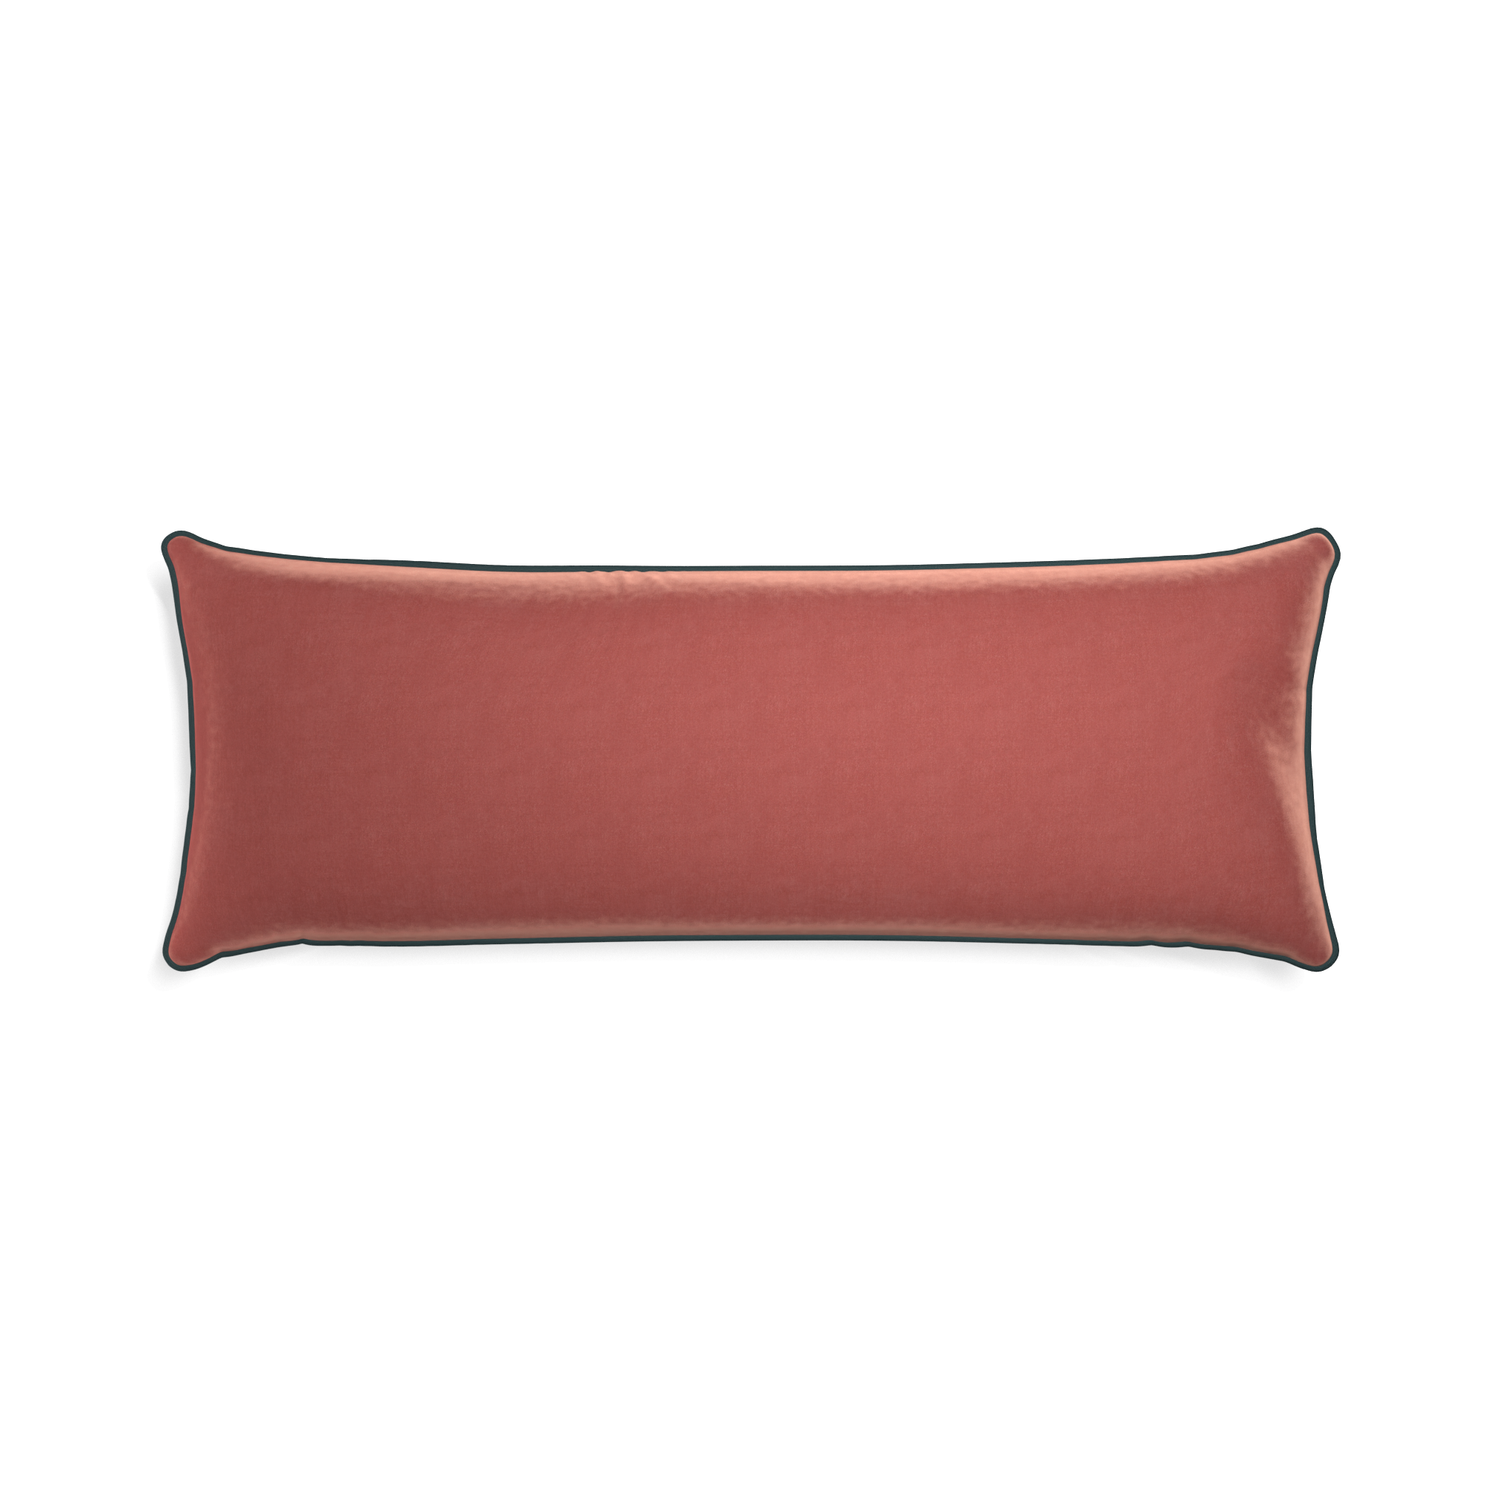 Xl-lumbar cosmo velvet custom coralpillow with p piping on white background